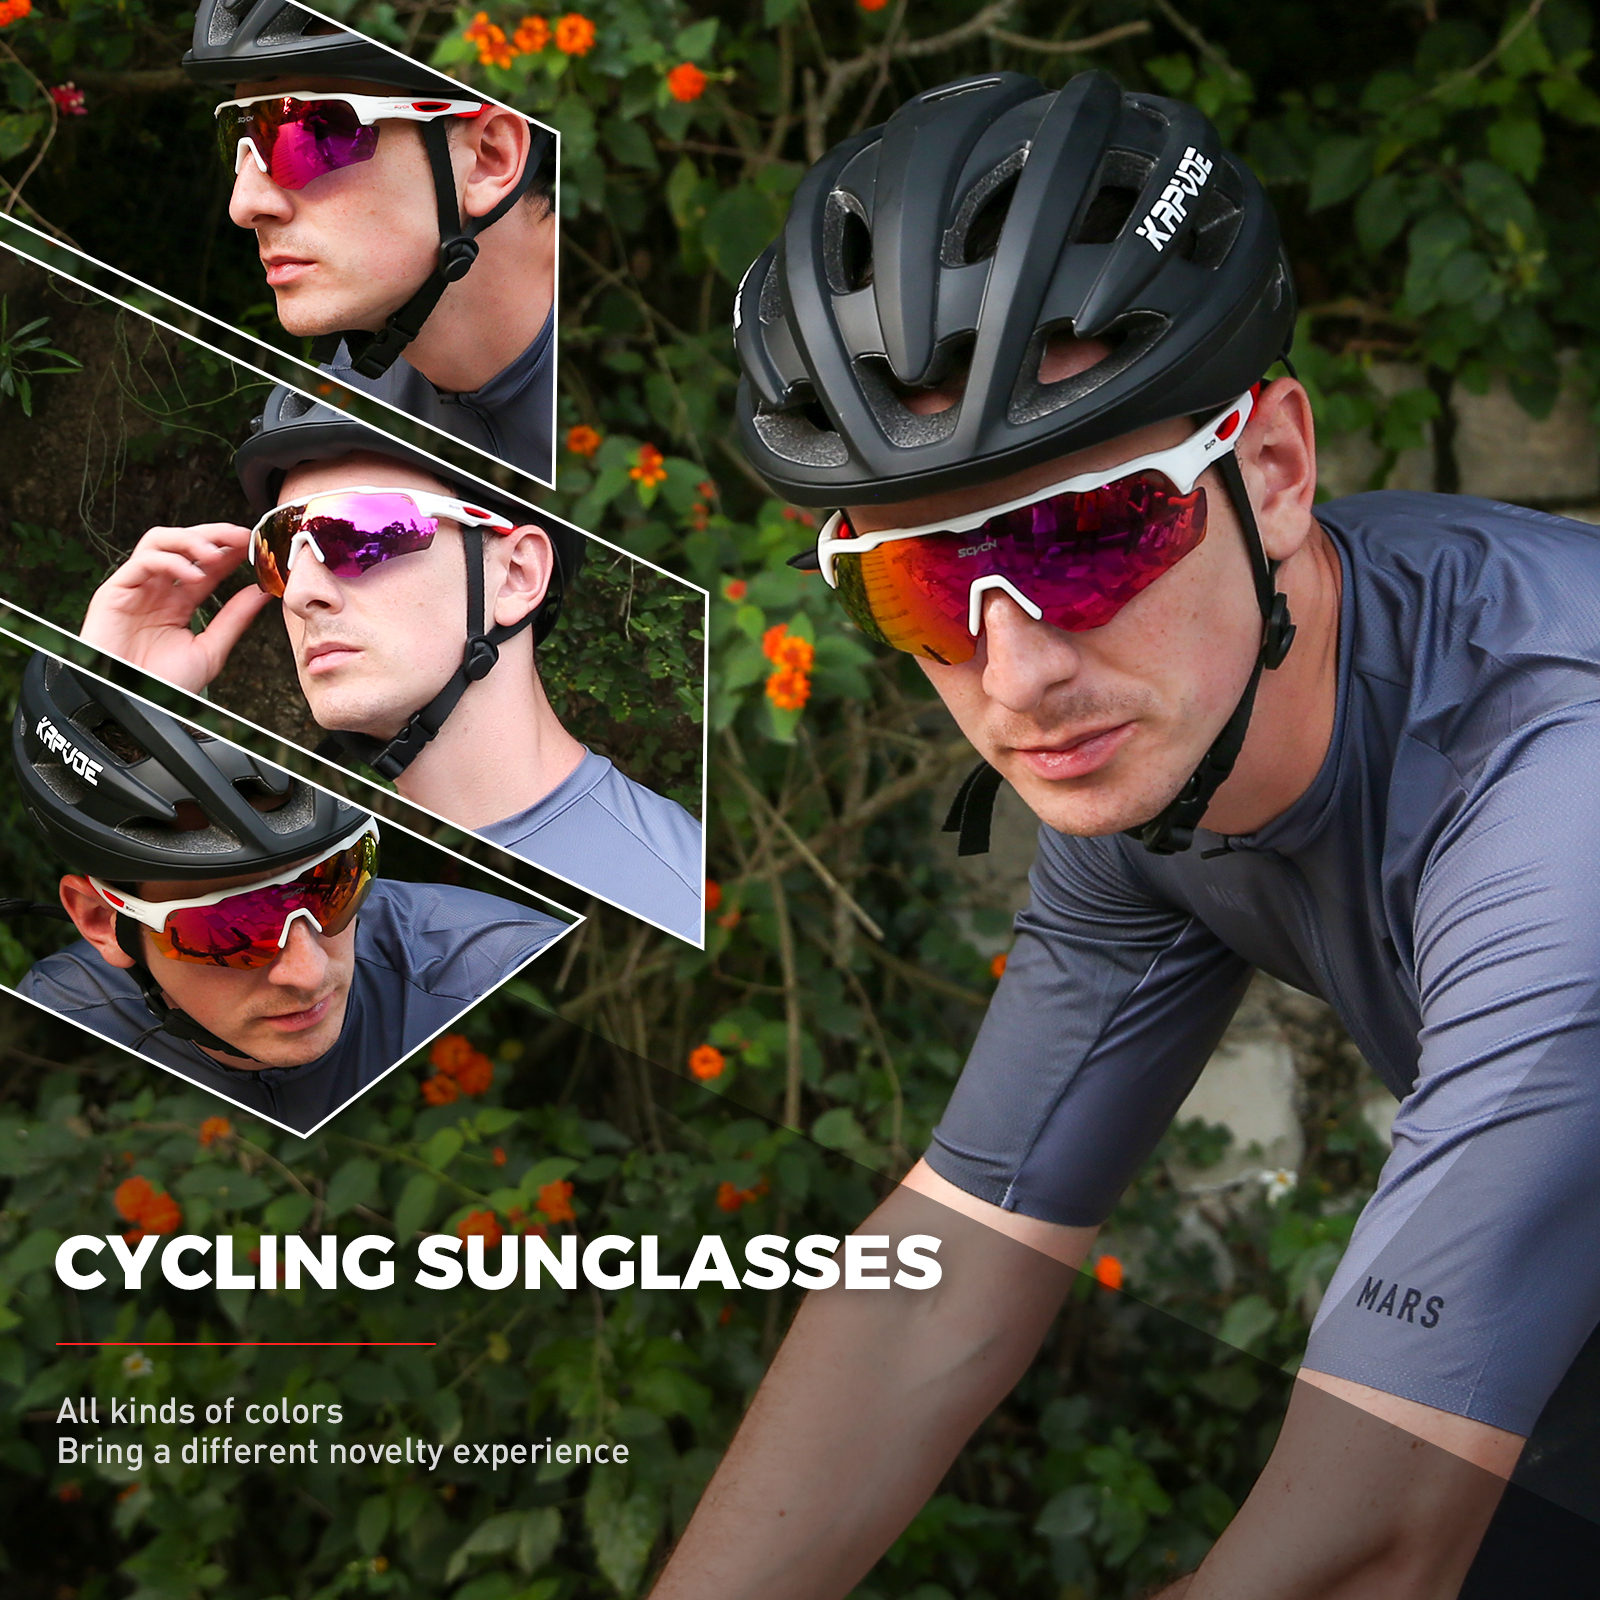 SAVCN Cycling Sunglasses for Men and Women - 3 Interchangeable Lenses for  MTB, Road Biking, Running, Golf, Fishing - UV400 Protection and Windproof Ey